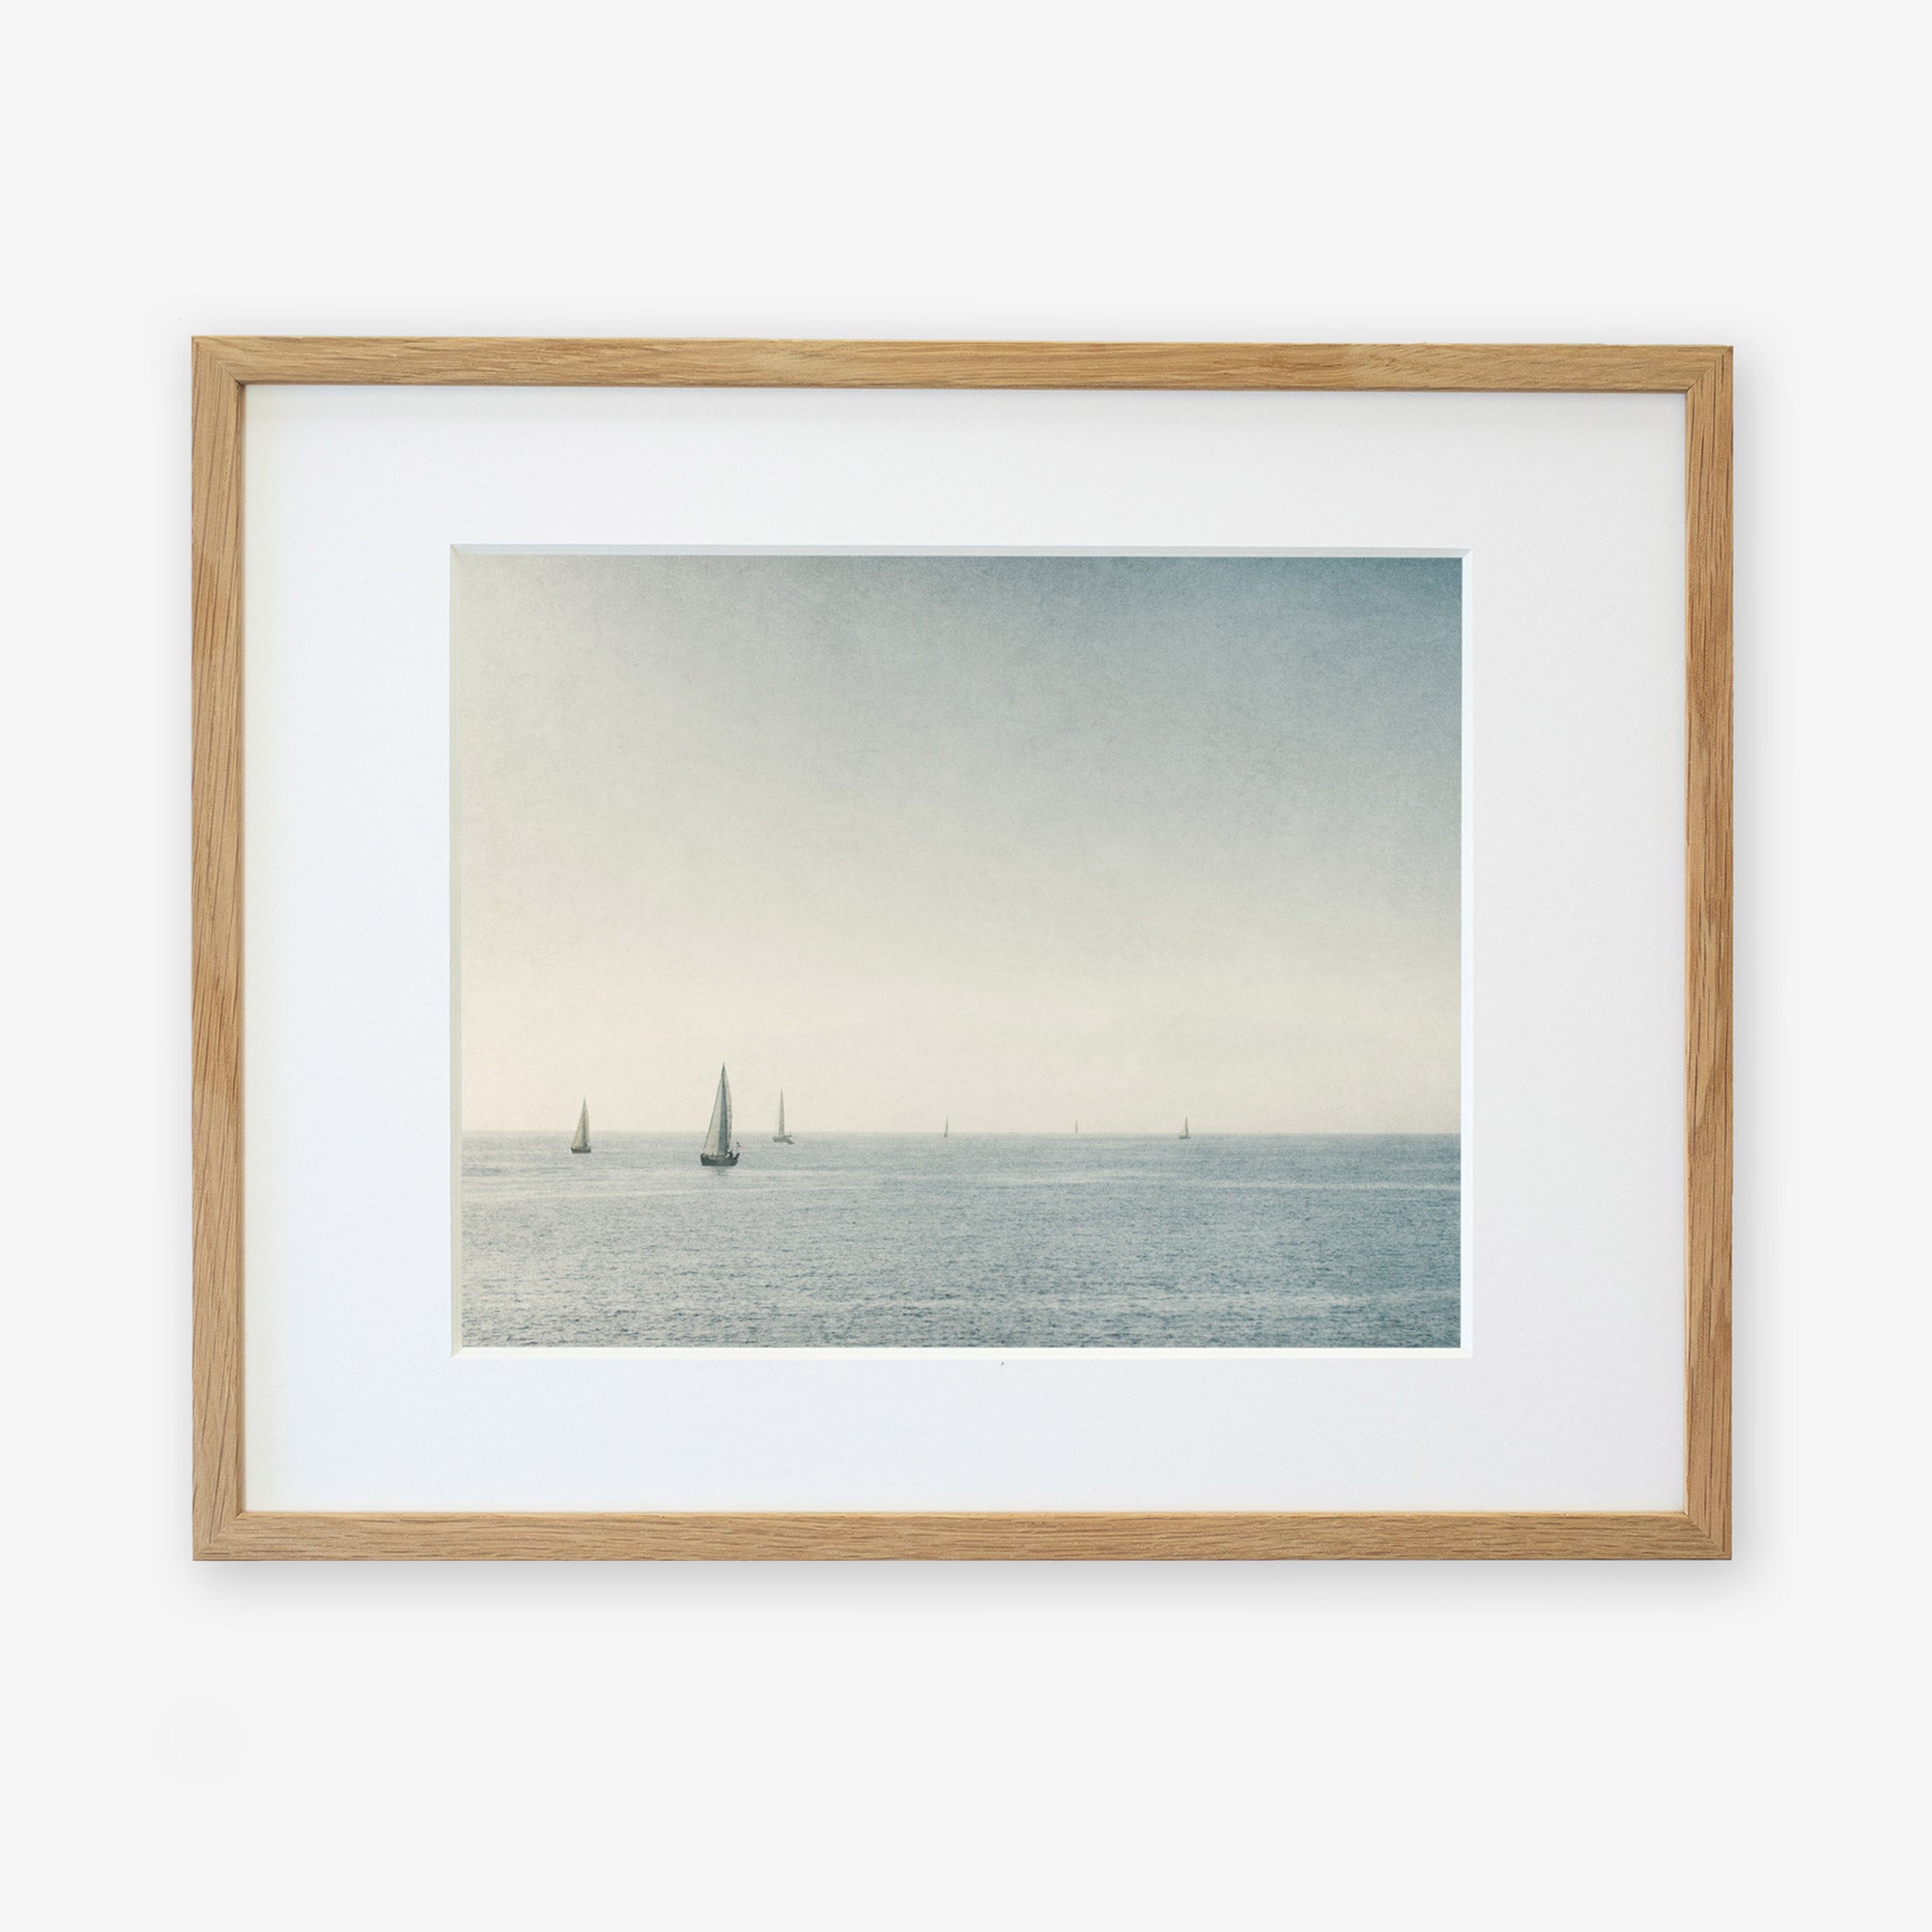 Framed artwork depicting a calm seascape with multiple sailboats on the horizon under a light blue sky, printed on archival photographic paper and enclosed in a light wooden frame with a white mat border: Moody Nautical Seascape Print, 'Sail Boats Approaching' by Offley Green.